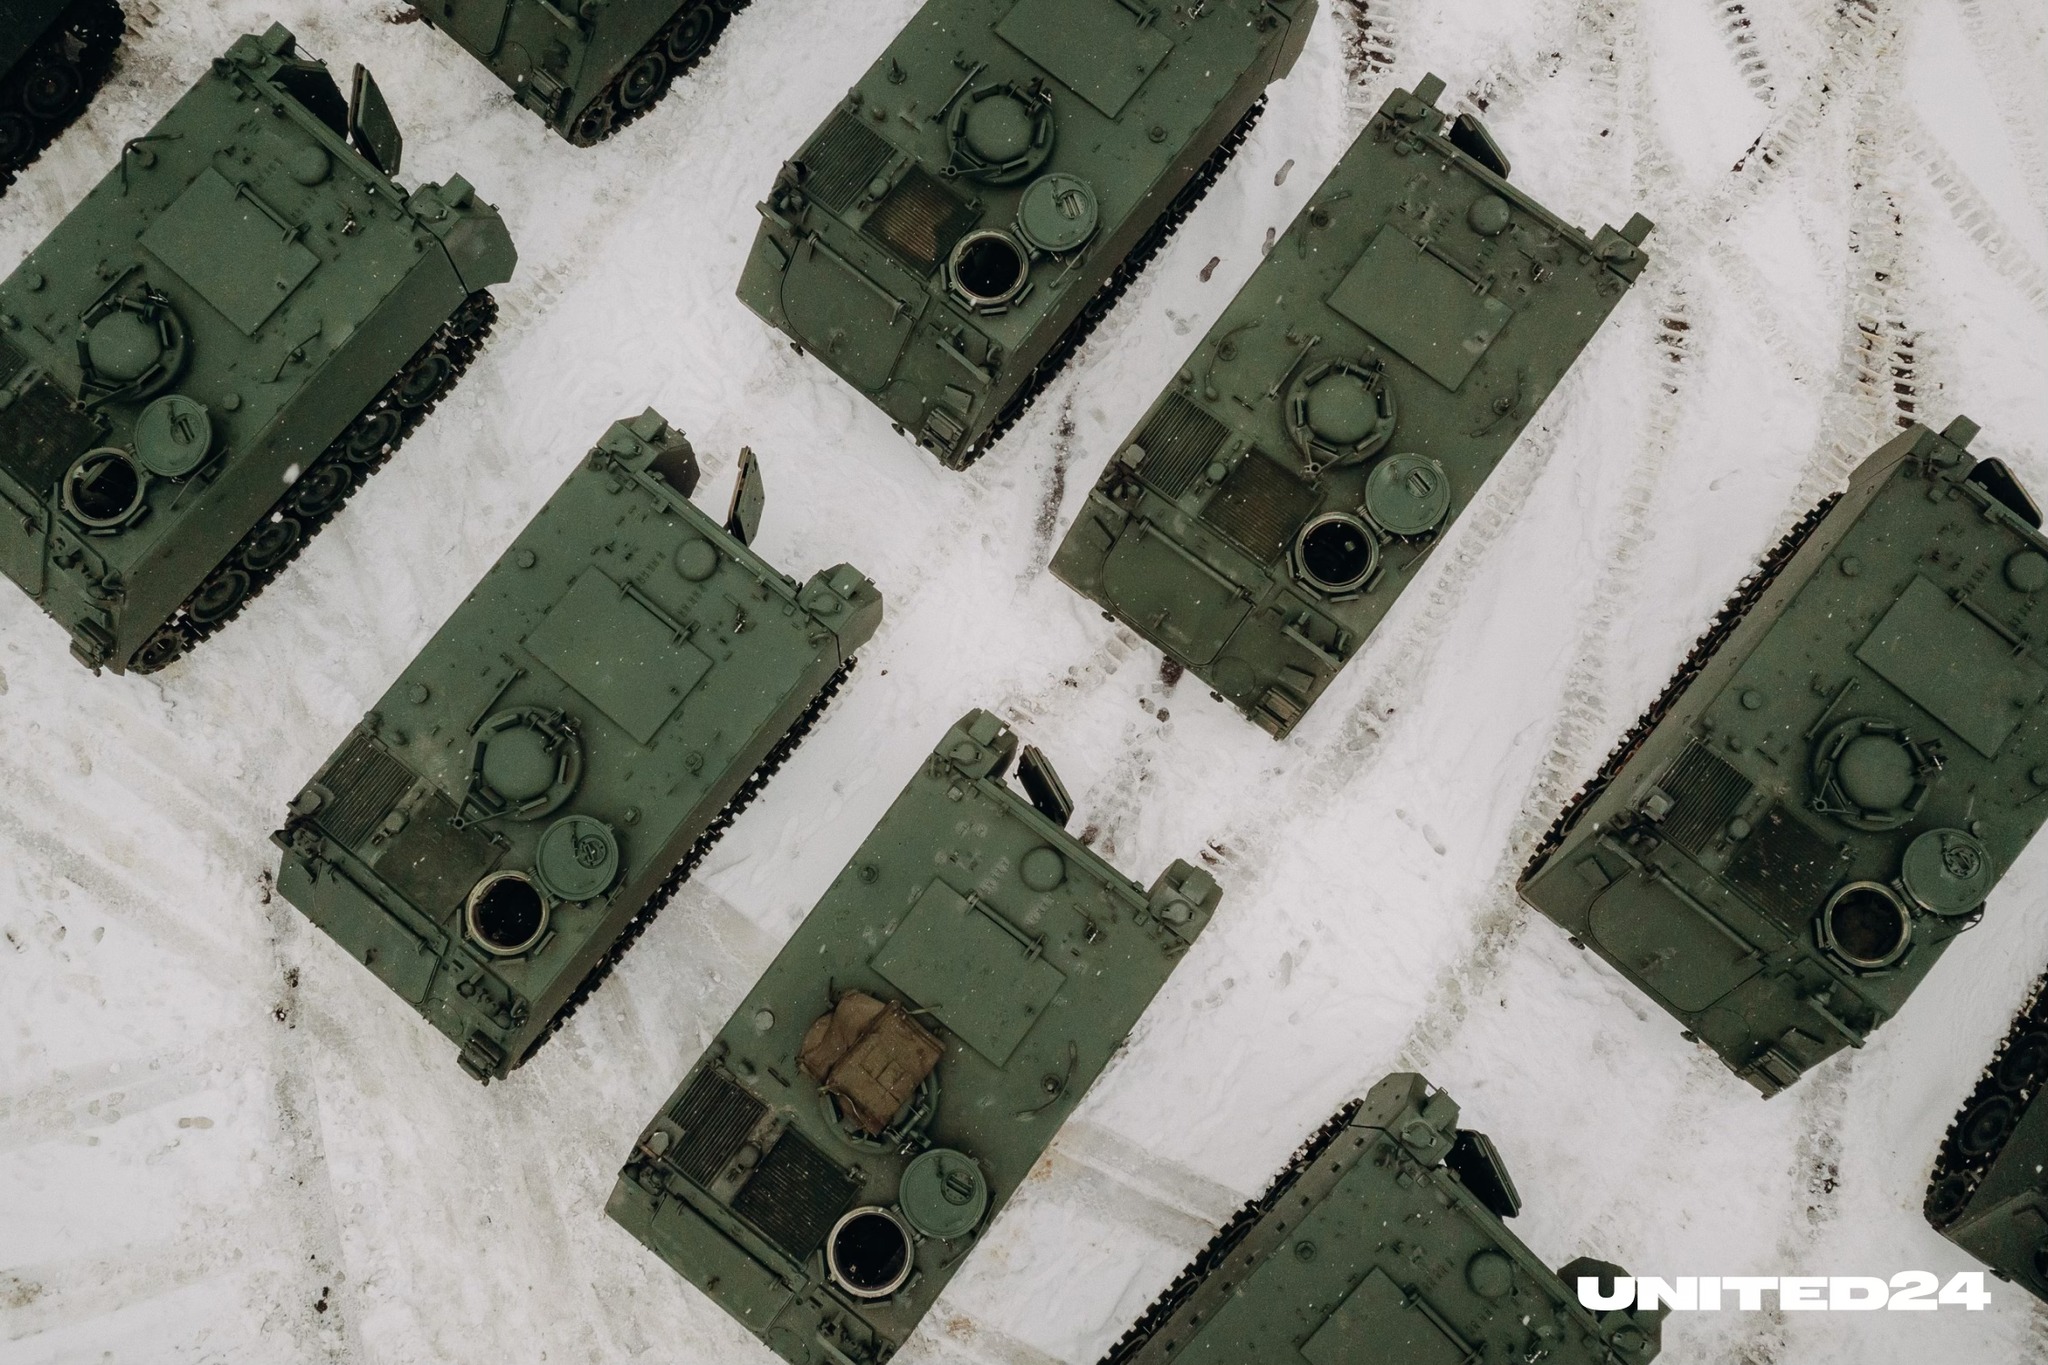 M113: Why Is a Vietnam-Era US APC Crucial to the War in Ukraine?